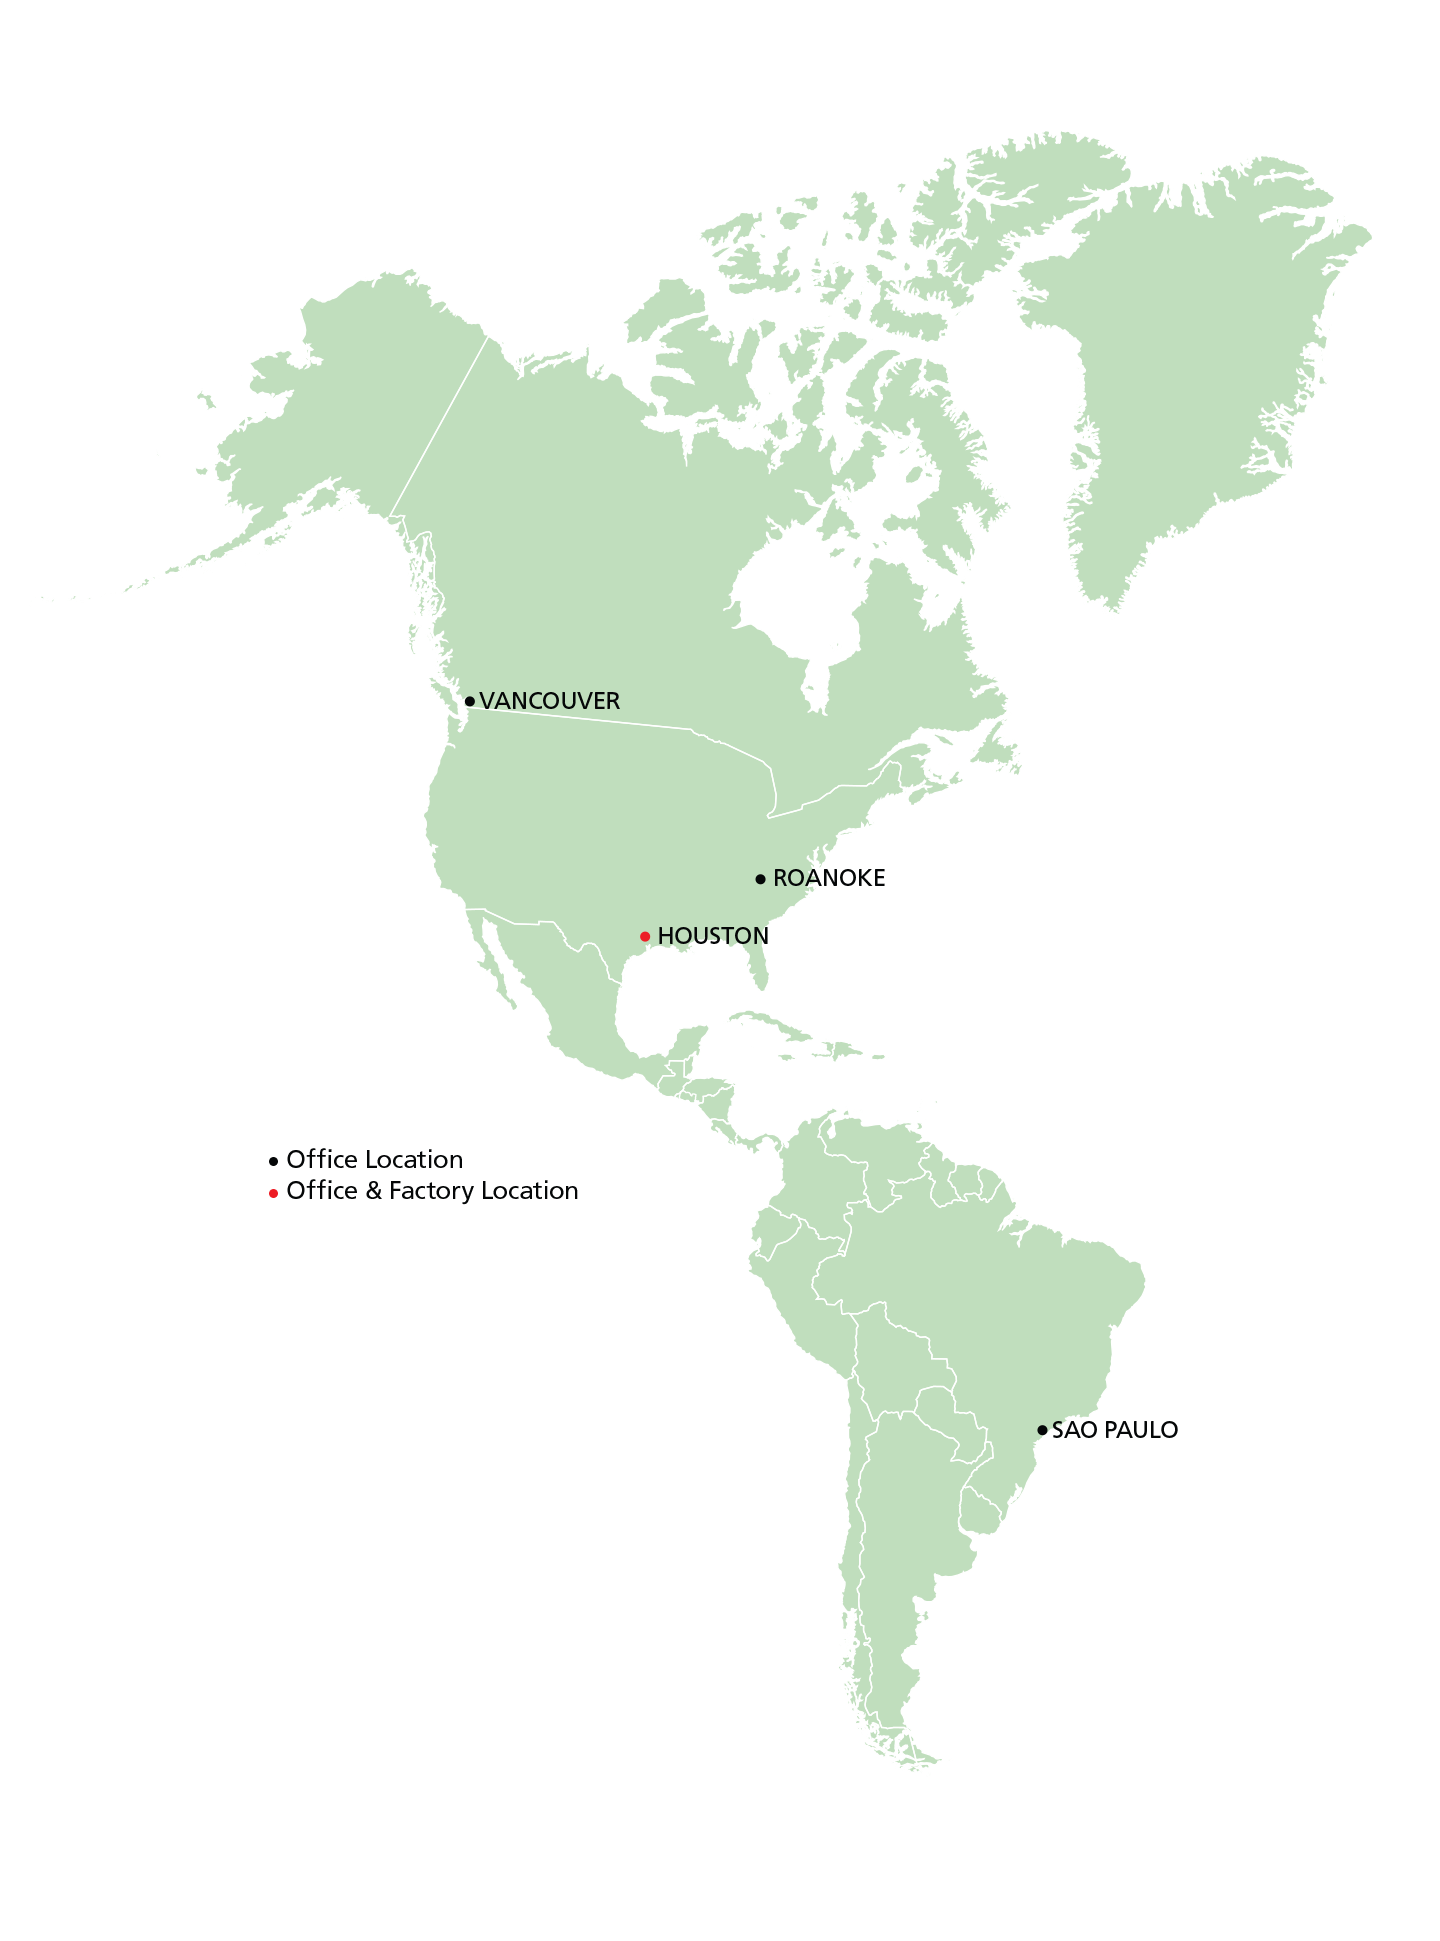 TMEIC locations in North and South America